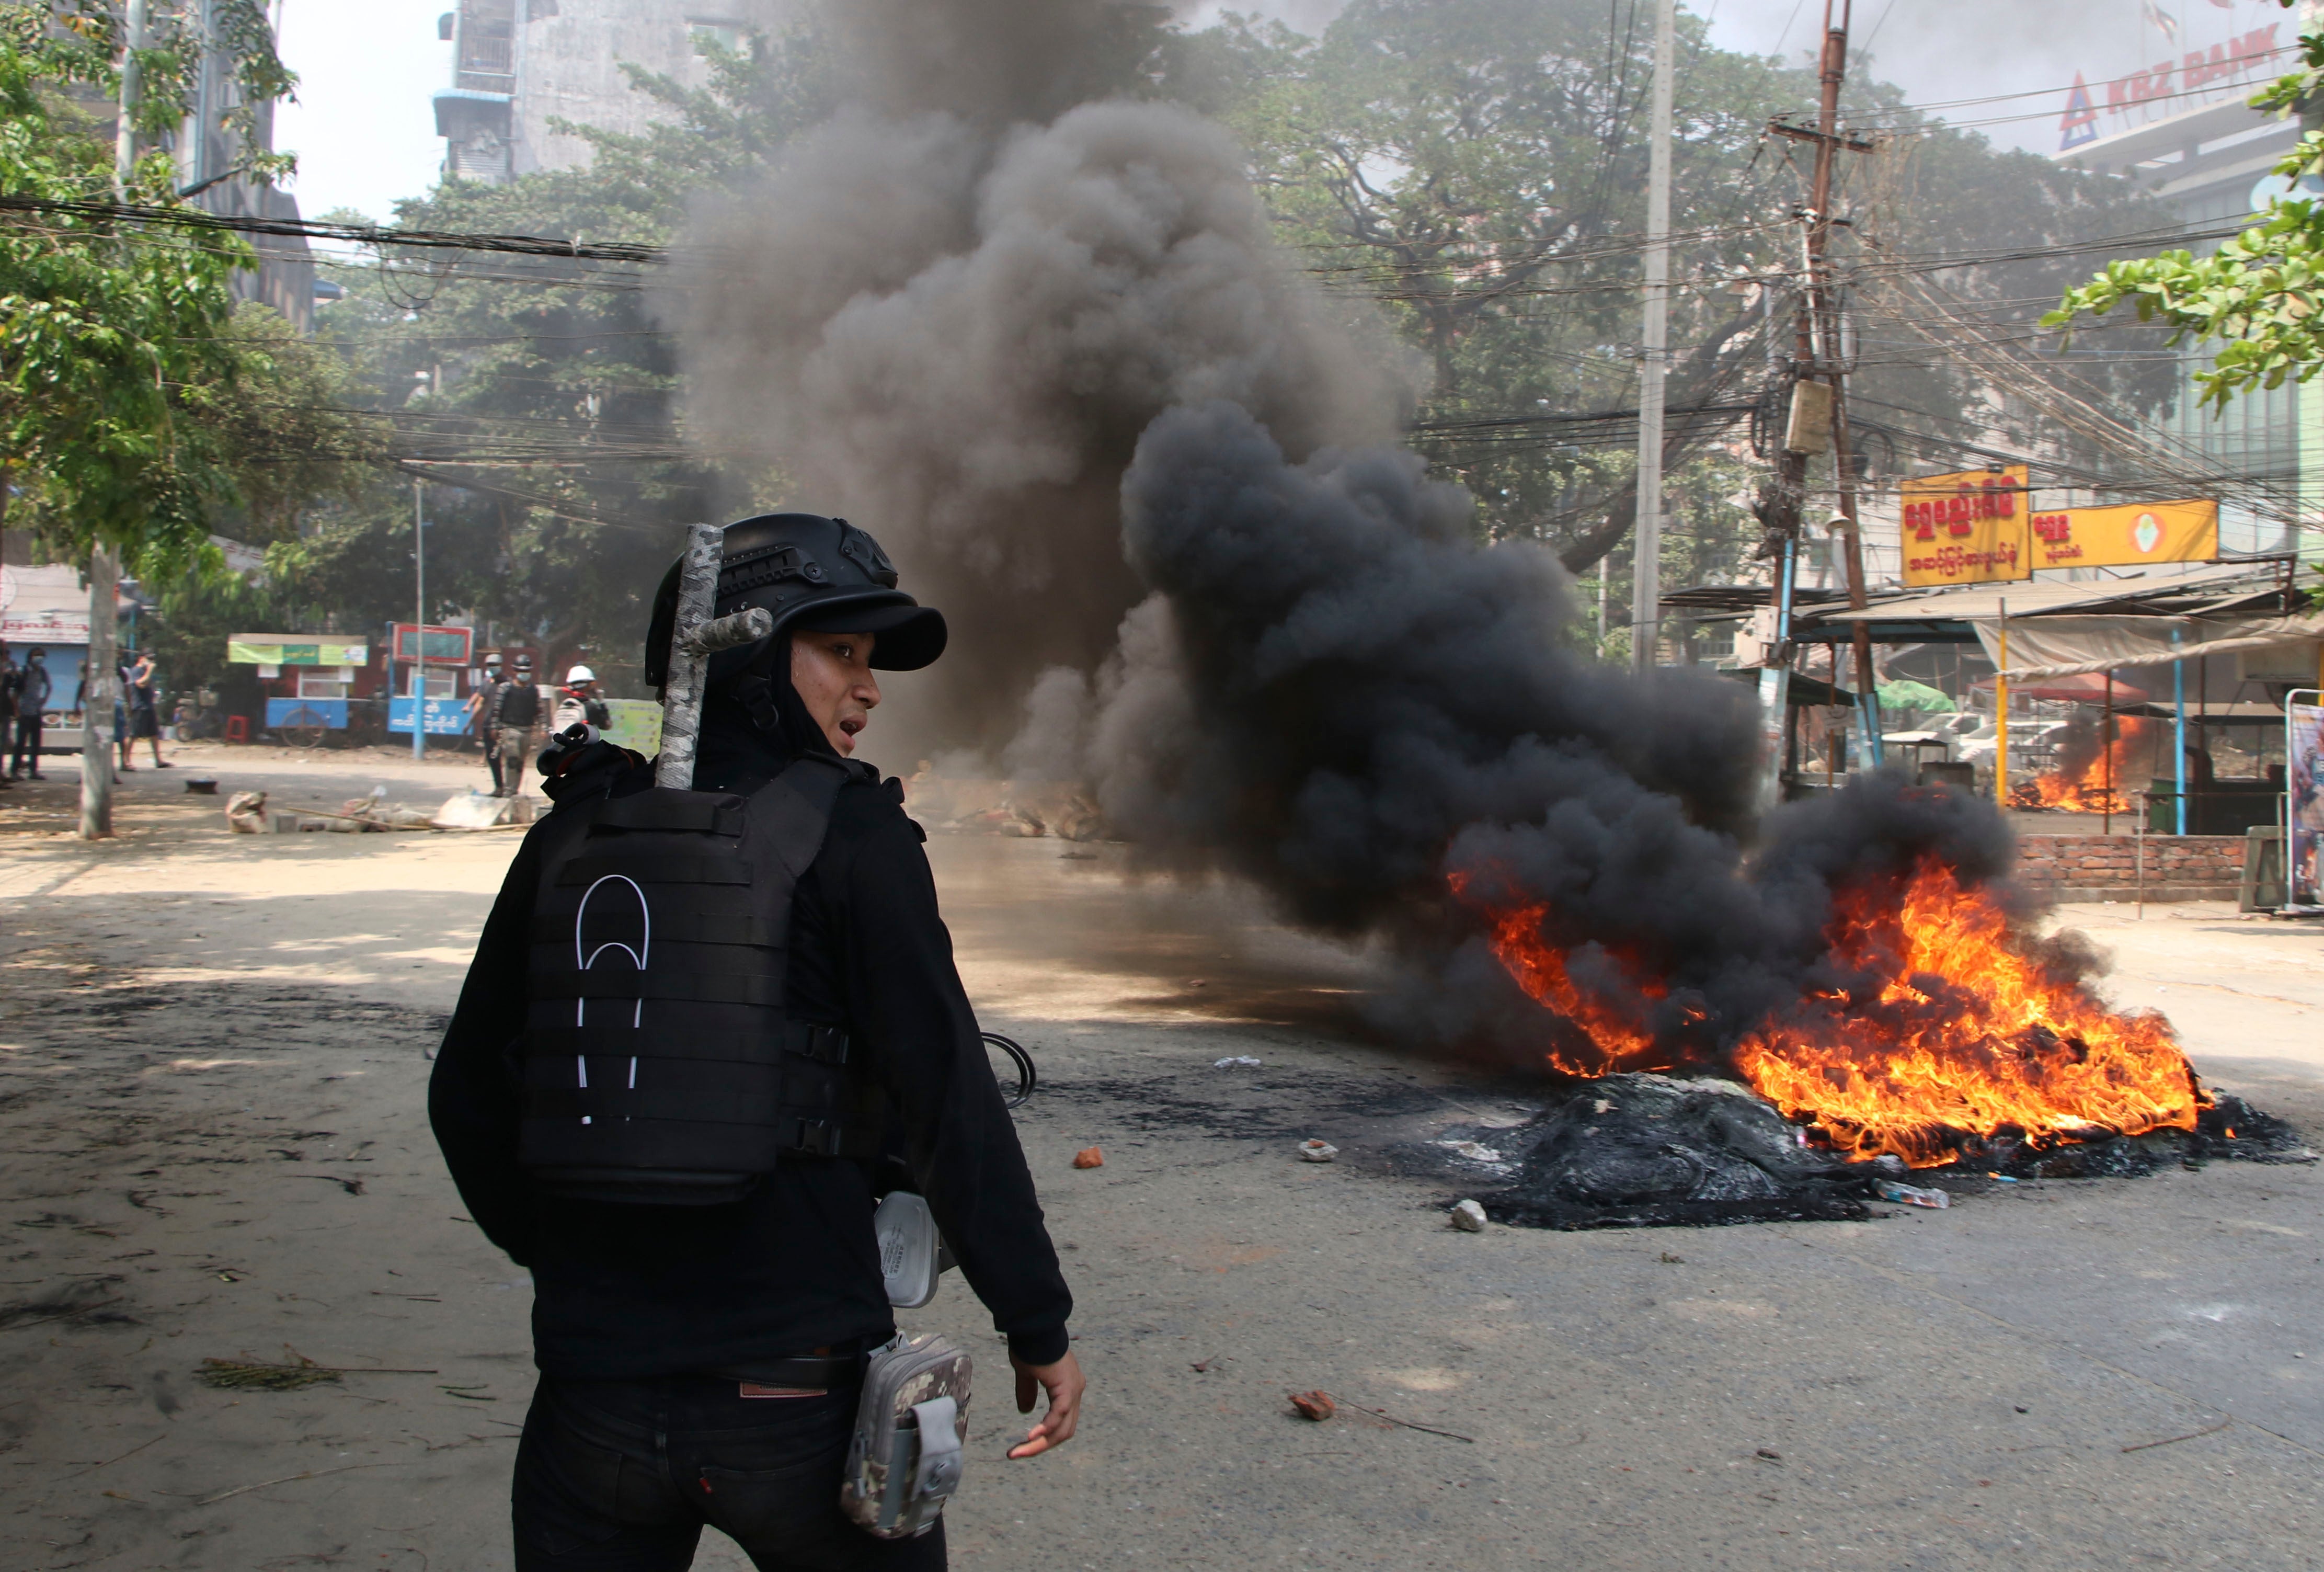 An anti-coup protester stands near a fire during a demonstration in Yangon, Myanmar, on 27 March